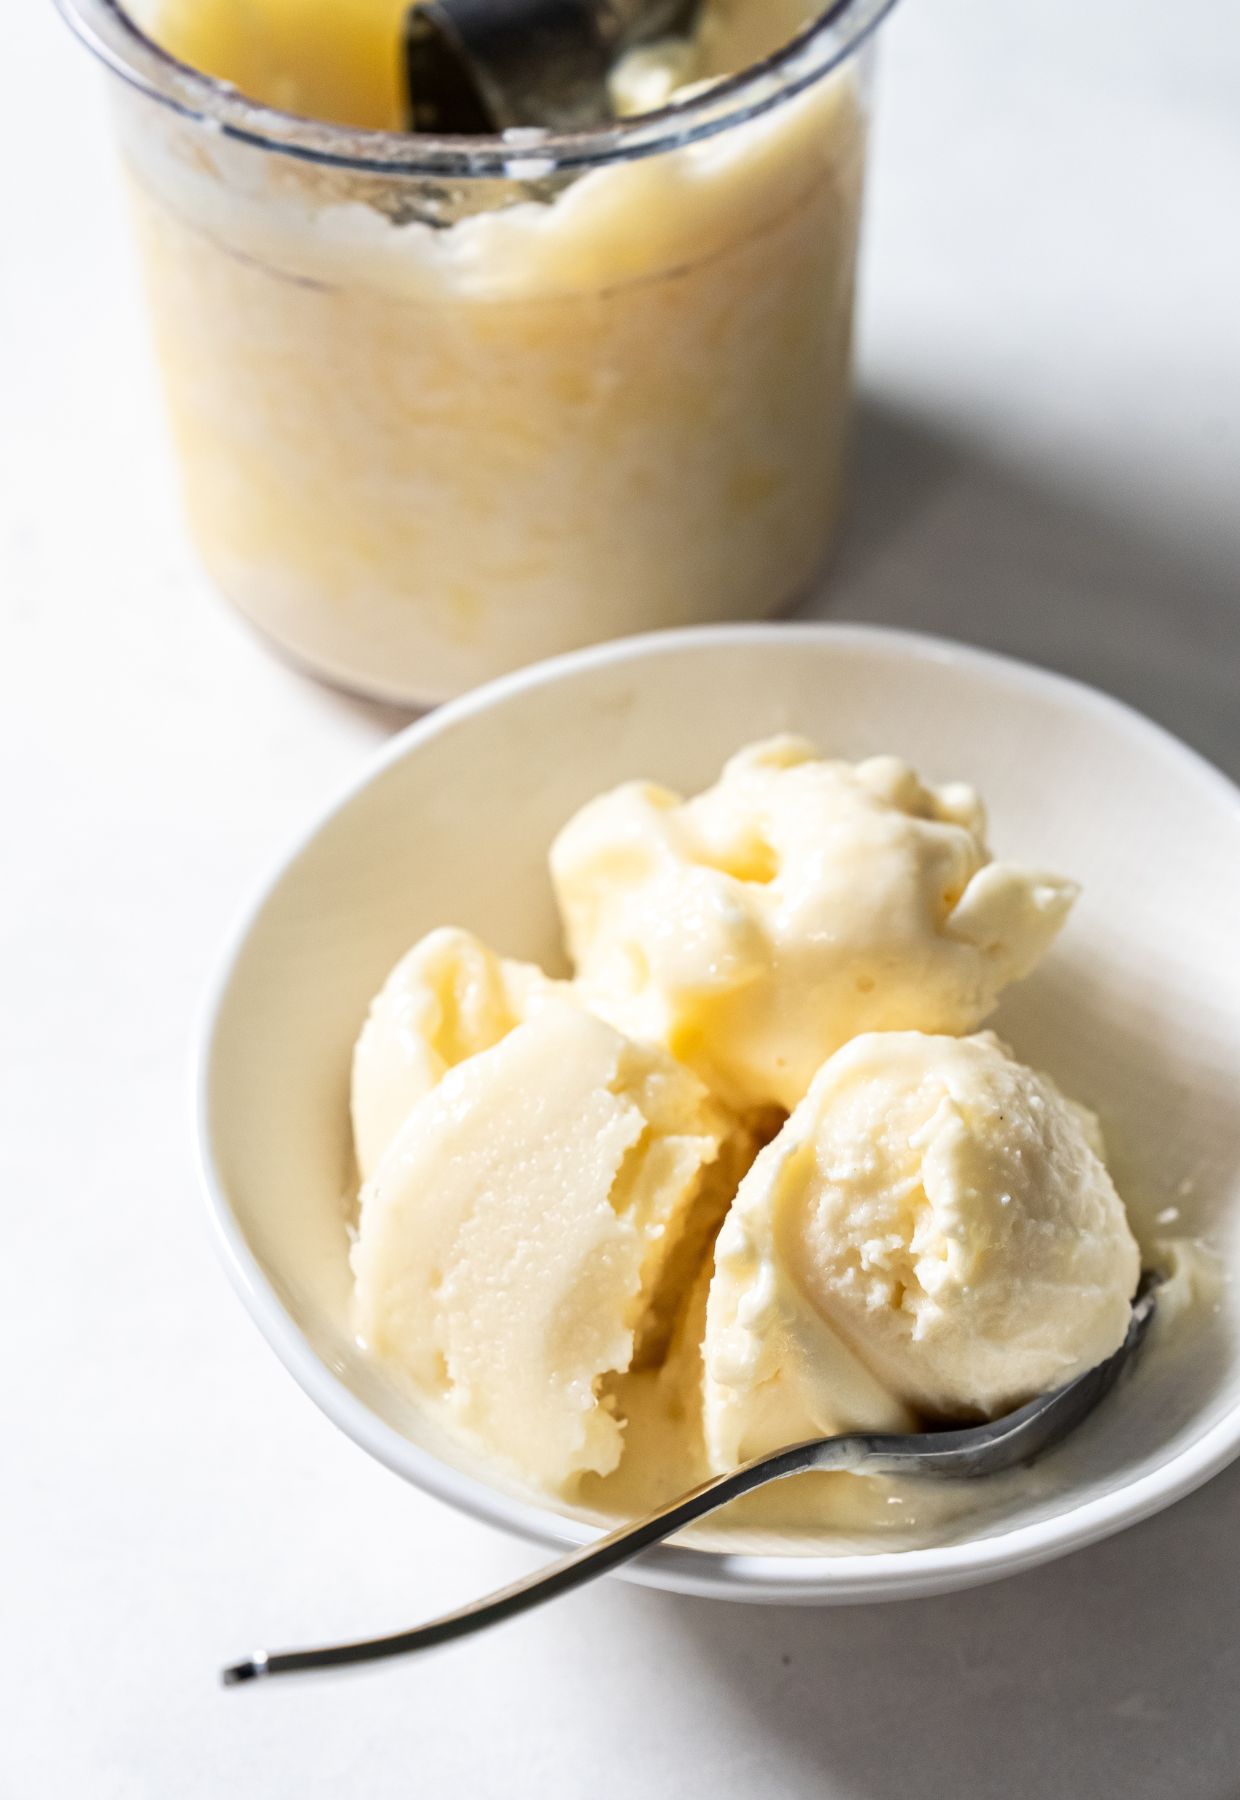 A bowl of creamy, pale yellow ice cream with a spoon. An ice cream container with similar contents is in the background, following one of the delicious Ninja Creami recipes.